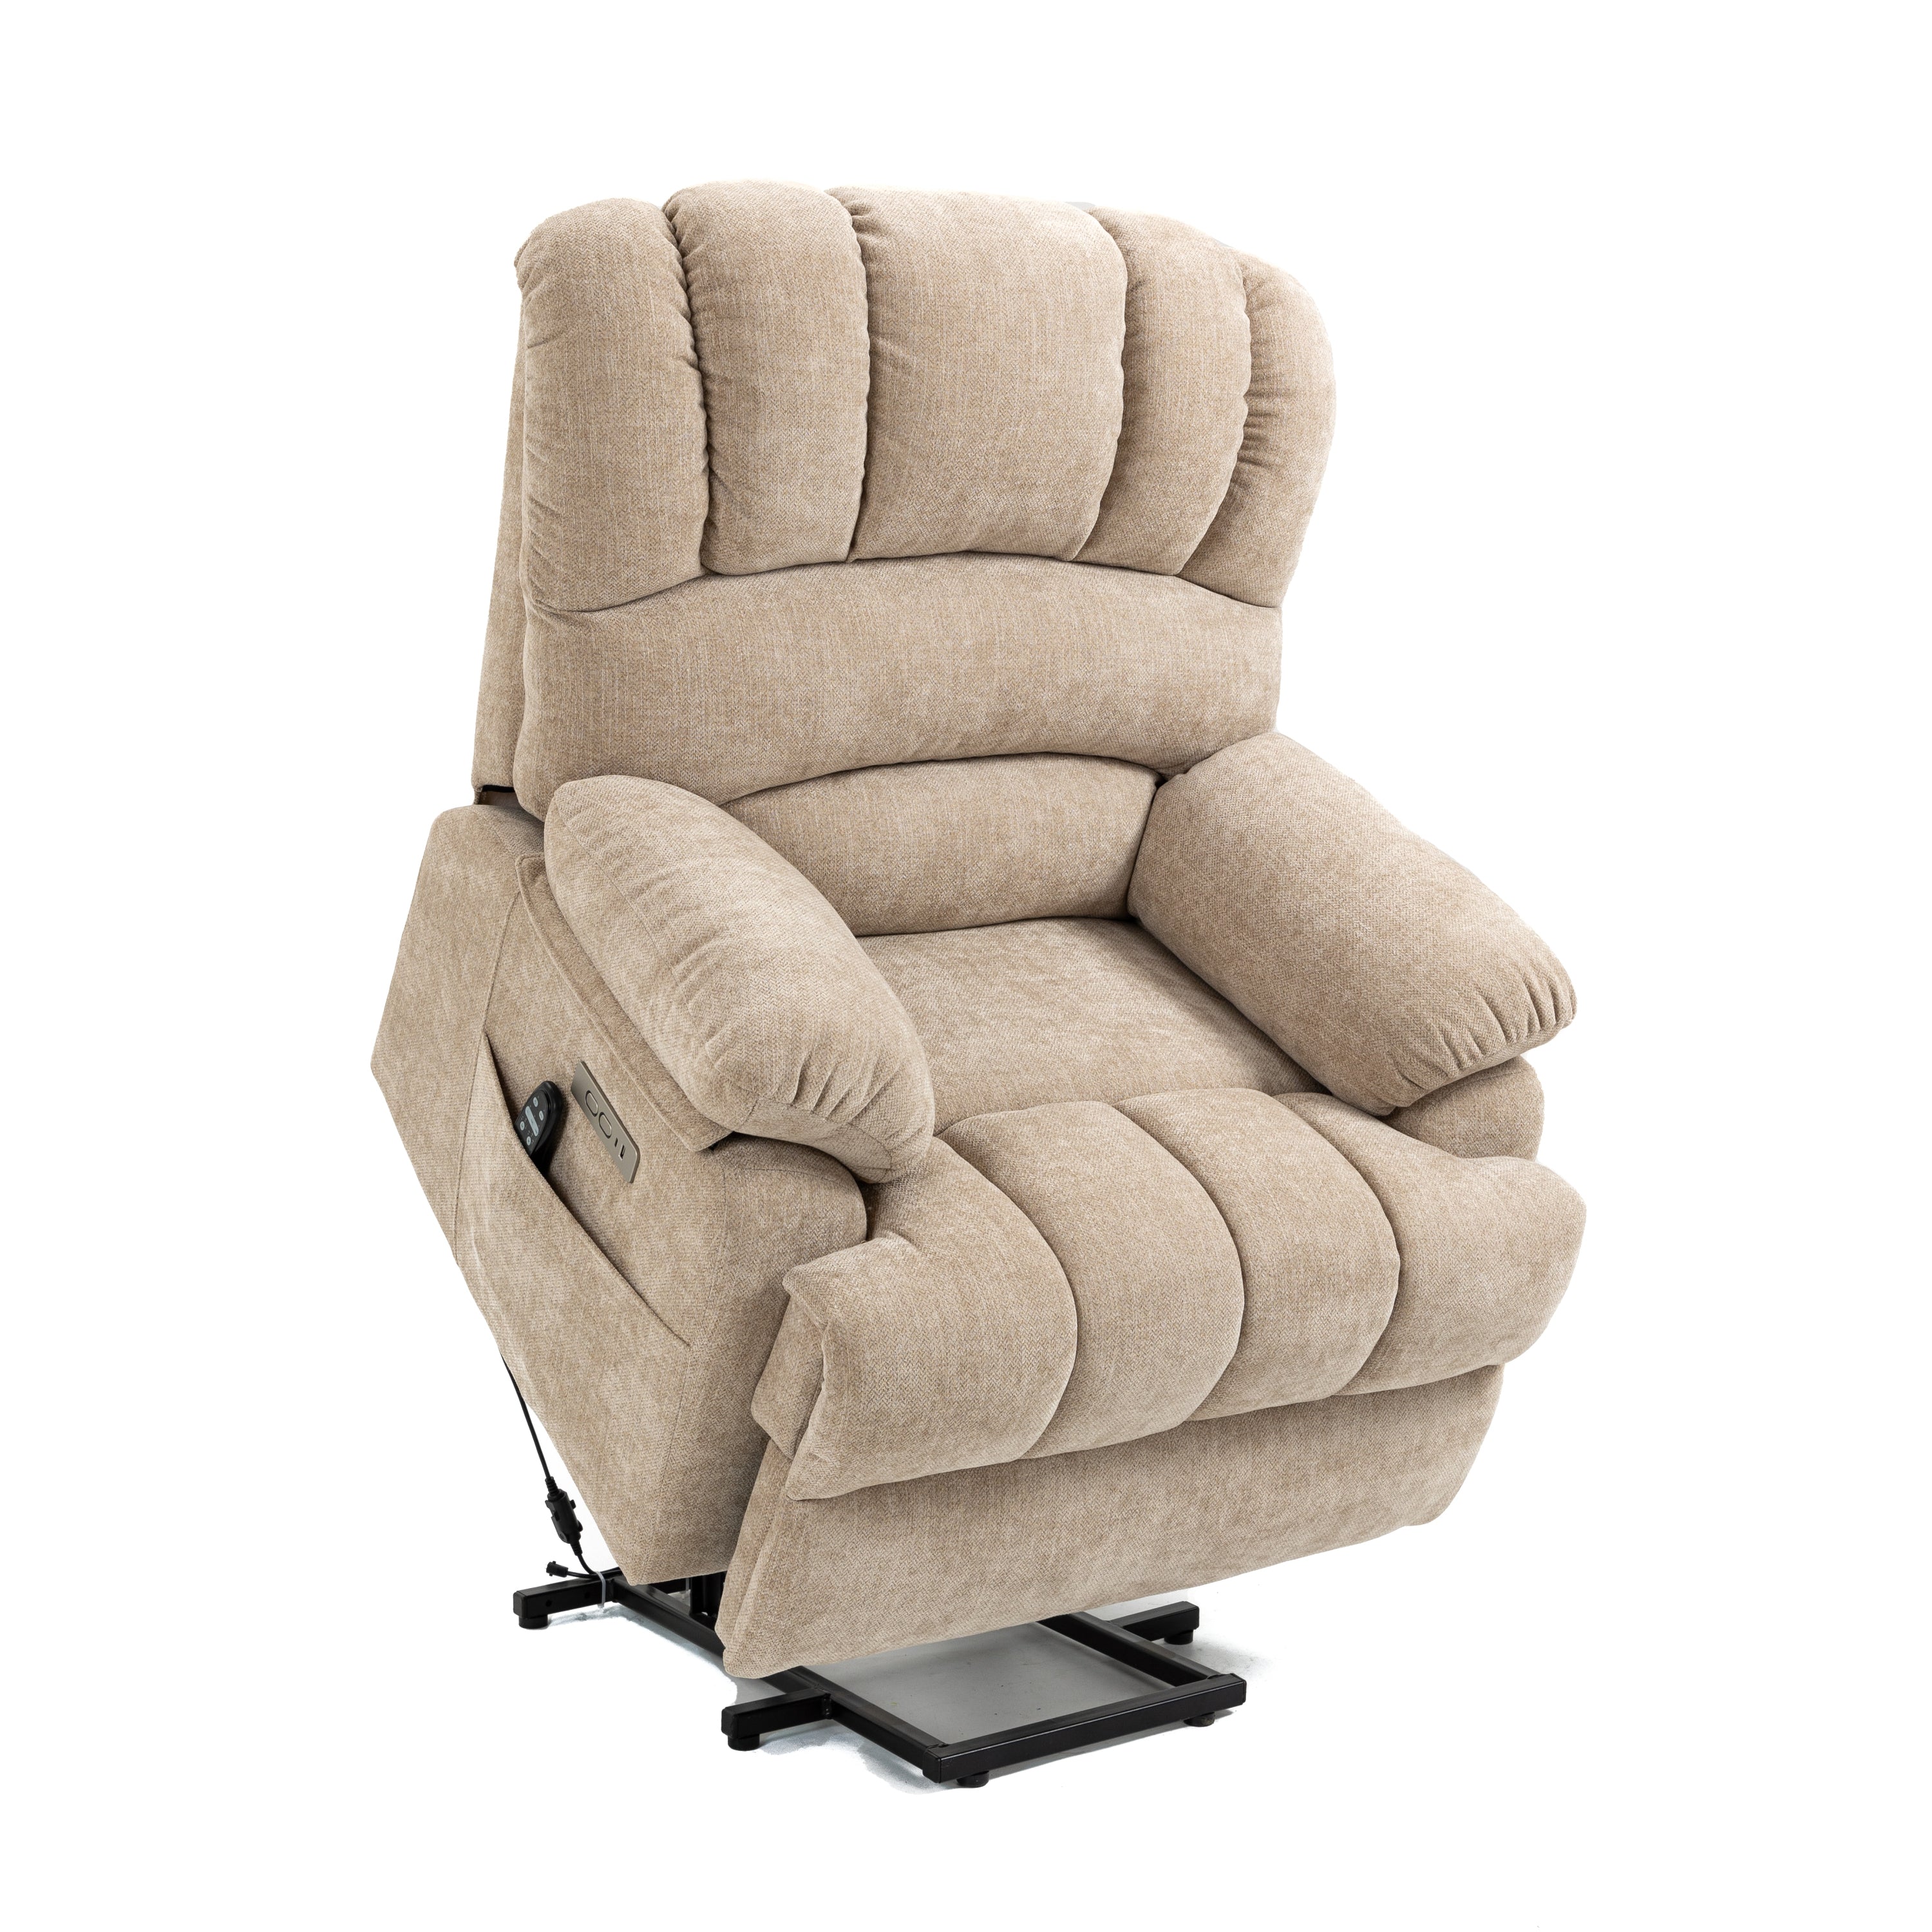 Newton Oversized Chenille Power Lift Recliner Chair With 8-Point Vibration Massage and Lumbar Heating